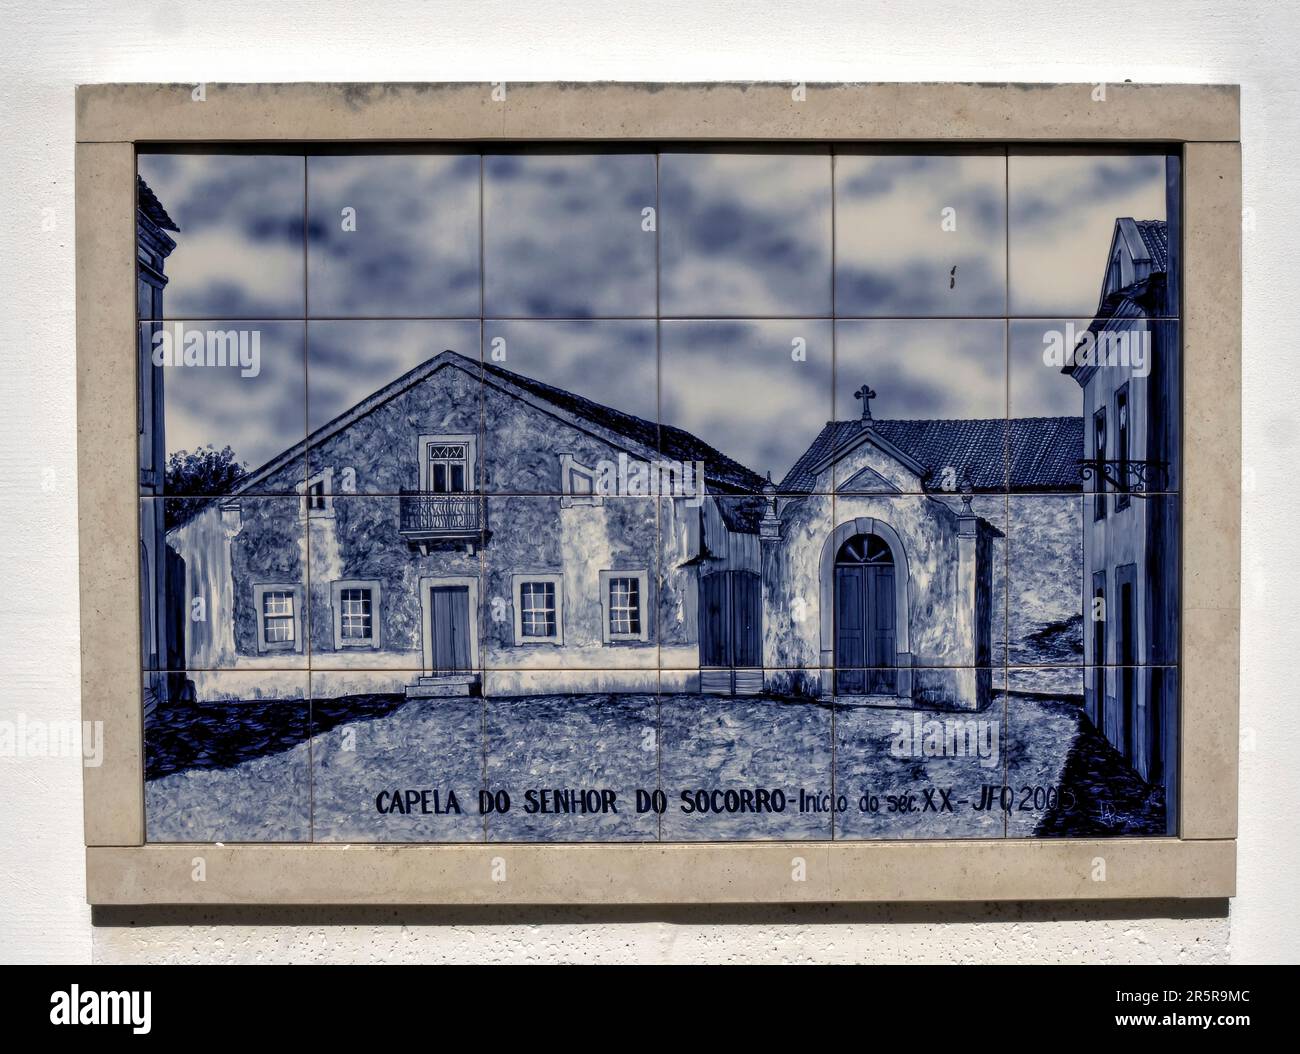 Quiaios, Portugal - August 14, 2022: Close up of ceramic tile design depicting Chapel of Our Lord of Socorro Stock Photo